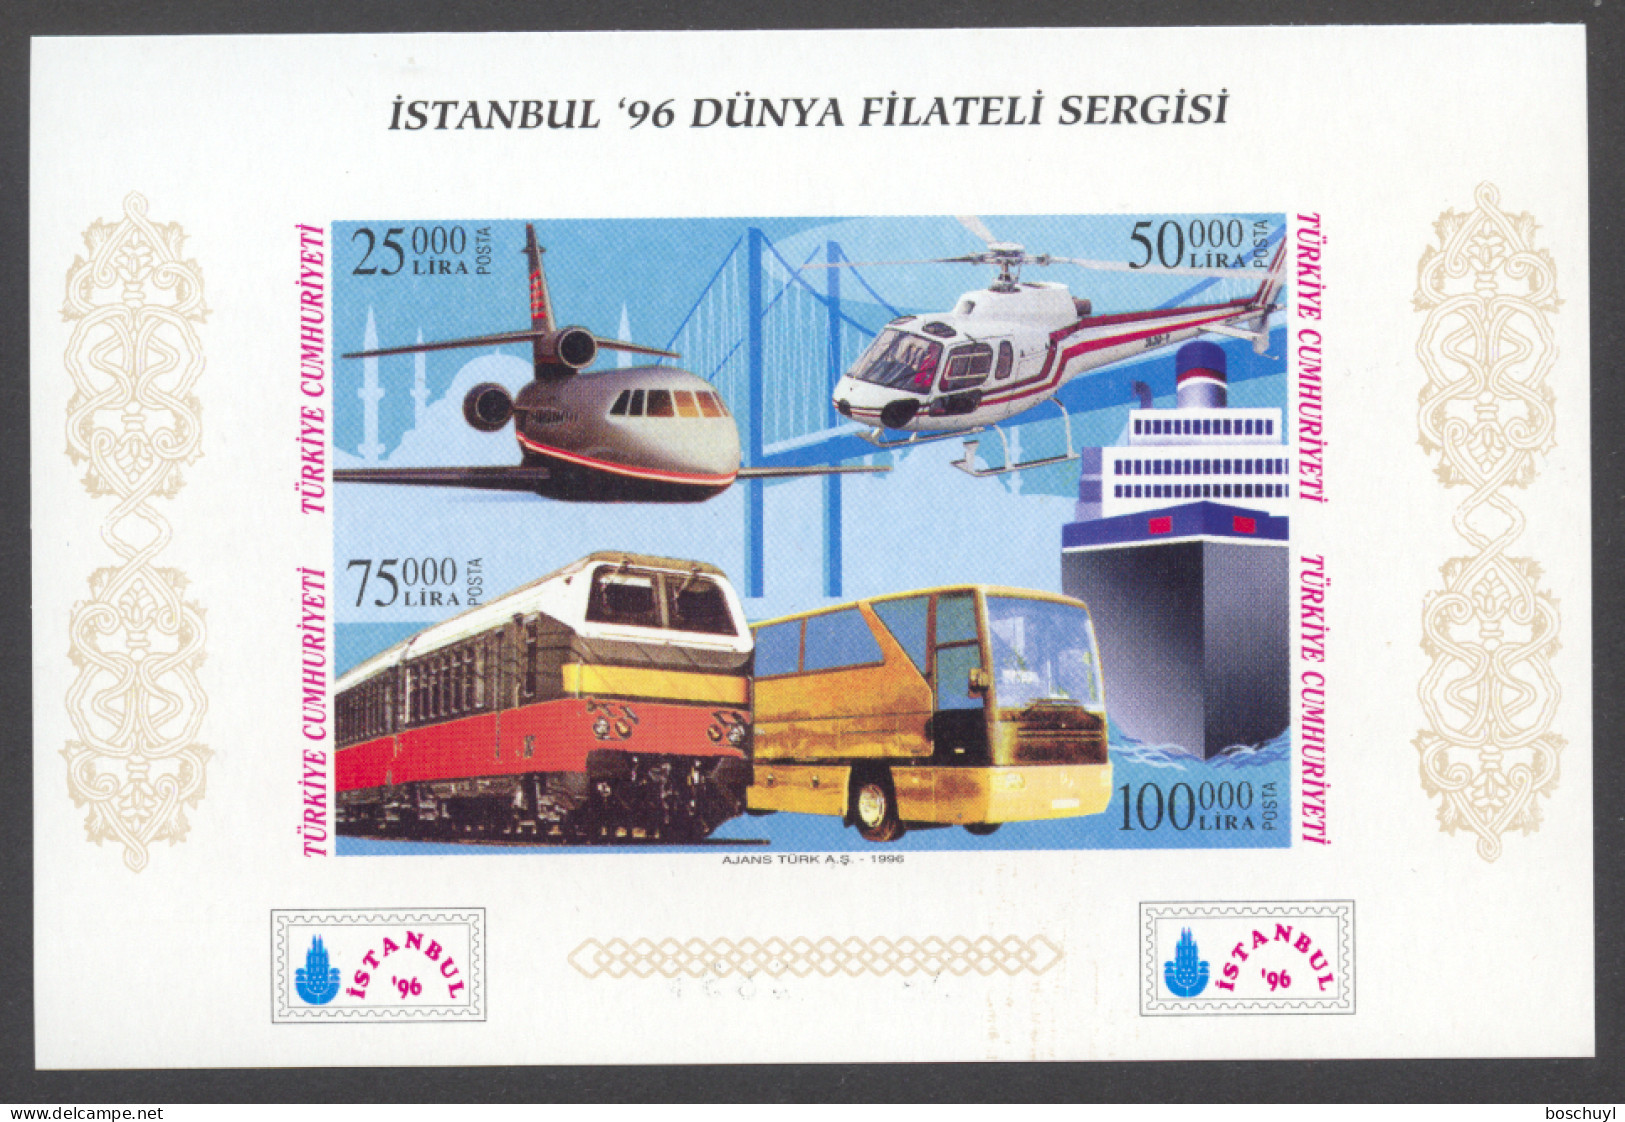 Turkey, 1996, Airplane, Helicopter, Train, Bus, Boat, Istanbul Exhibition, Black Imprint, MNH, Michel Block 32Bb - Nuevos